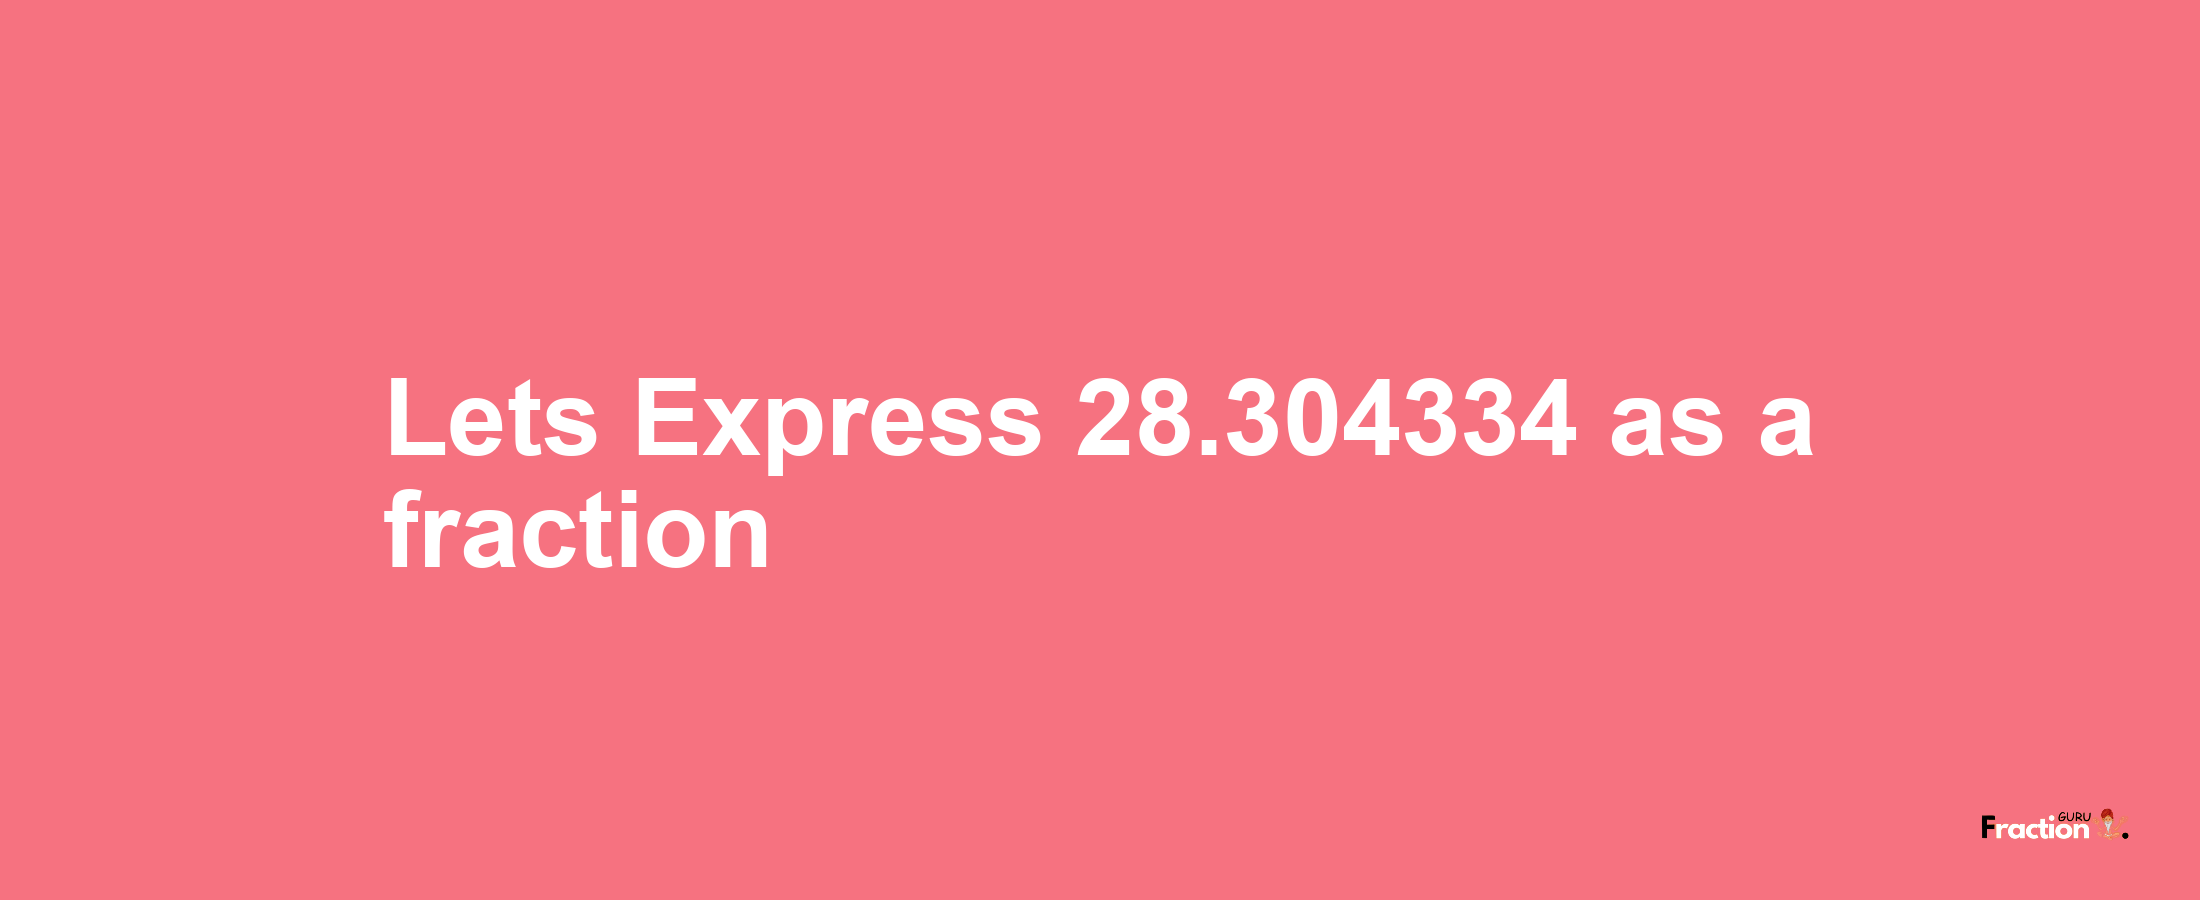 Lets Express 28.304334 as afraction